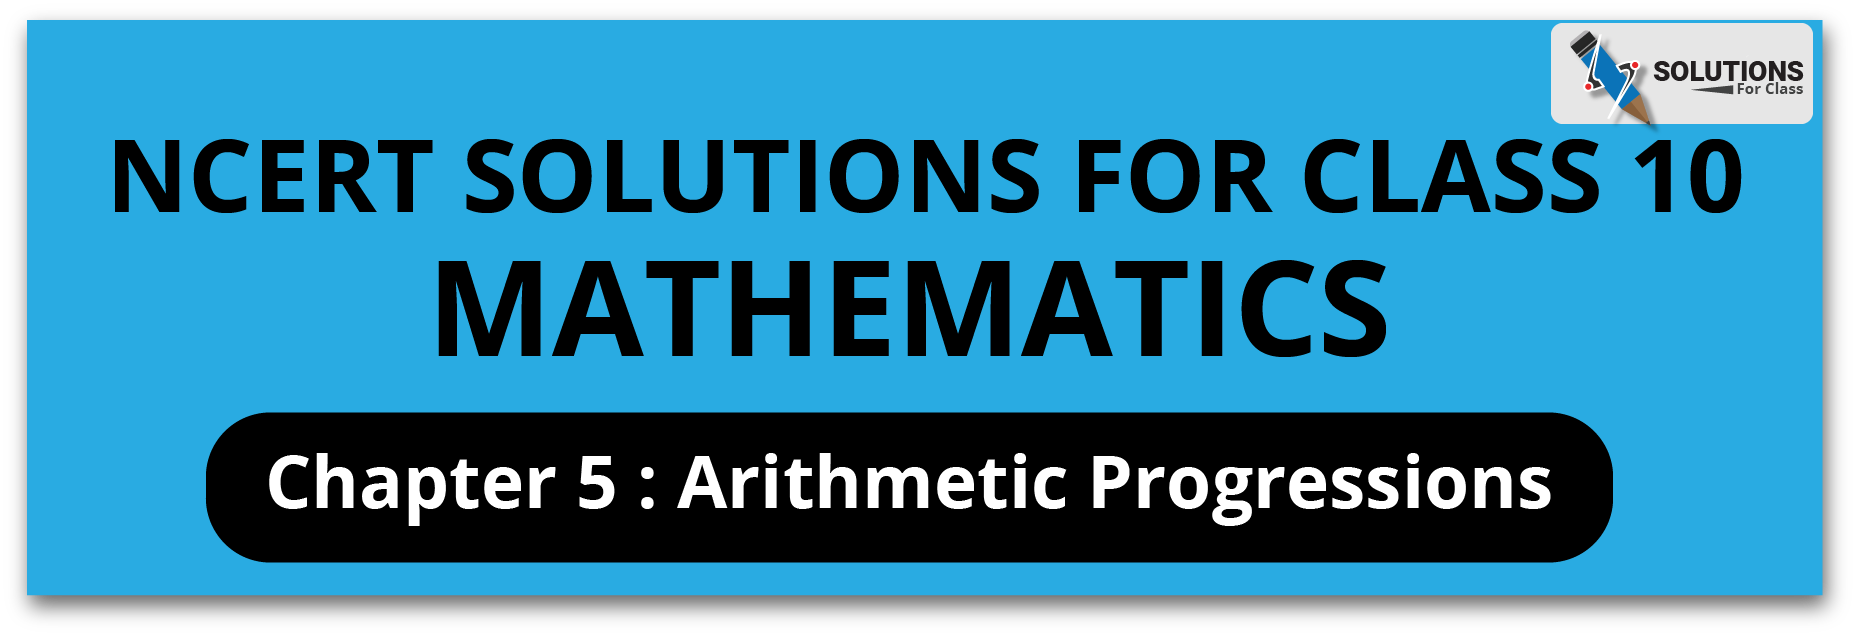 NCERT Solutions For Class 10, Maths, Chapter 5 Arithmetic Progression